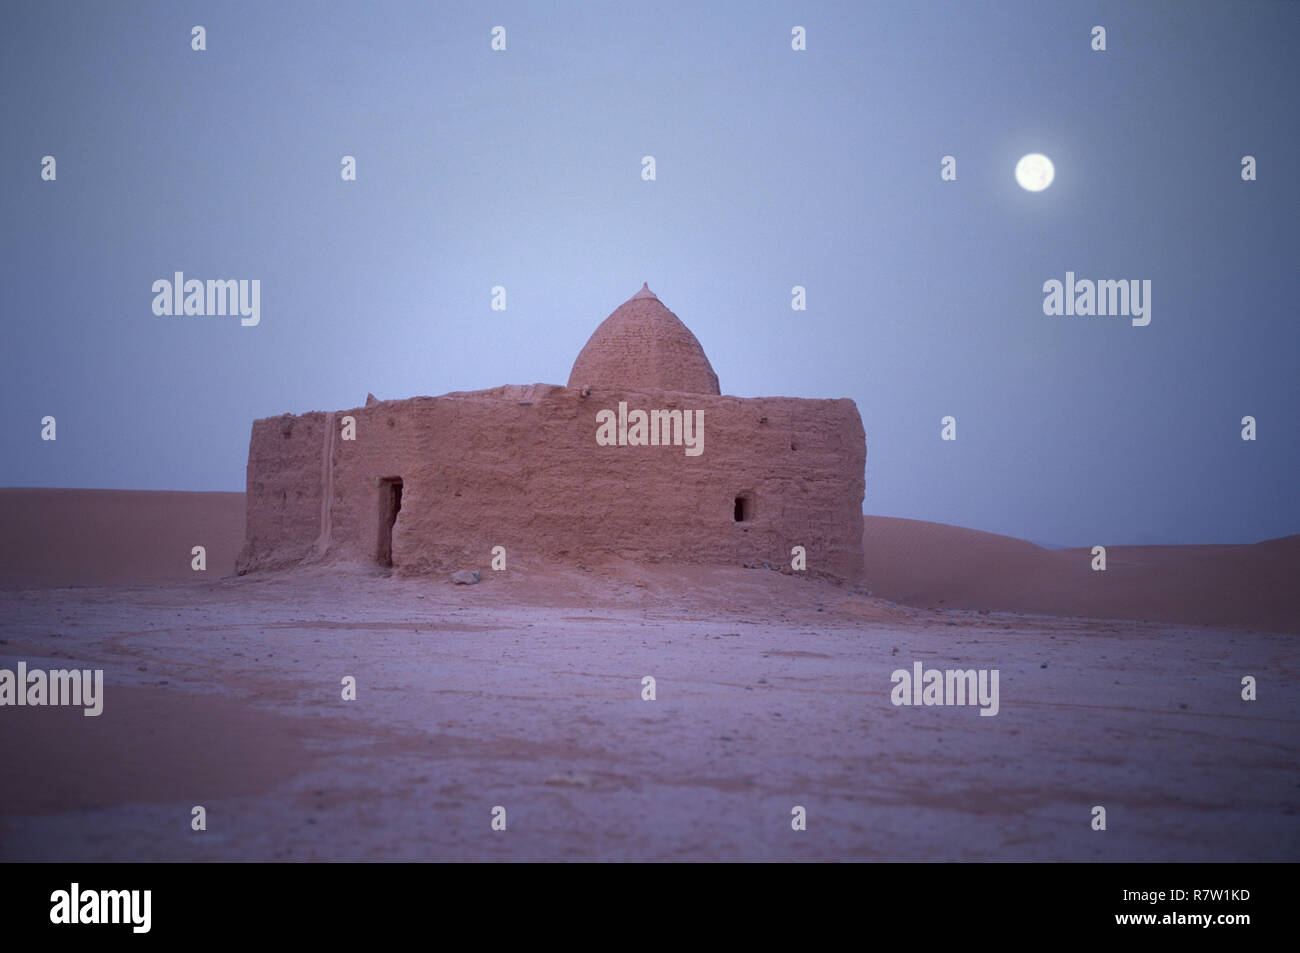 A temple in desert. Stock Photo